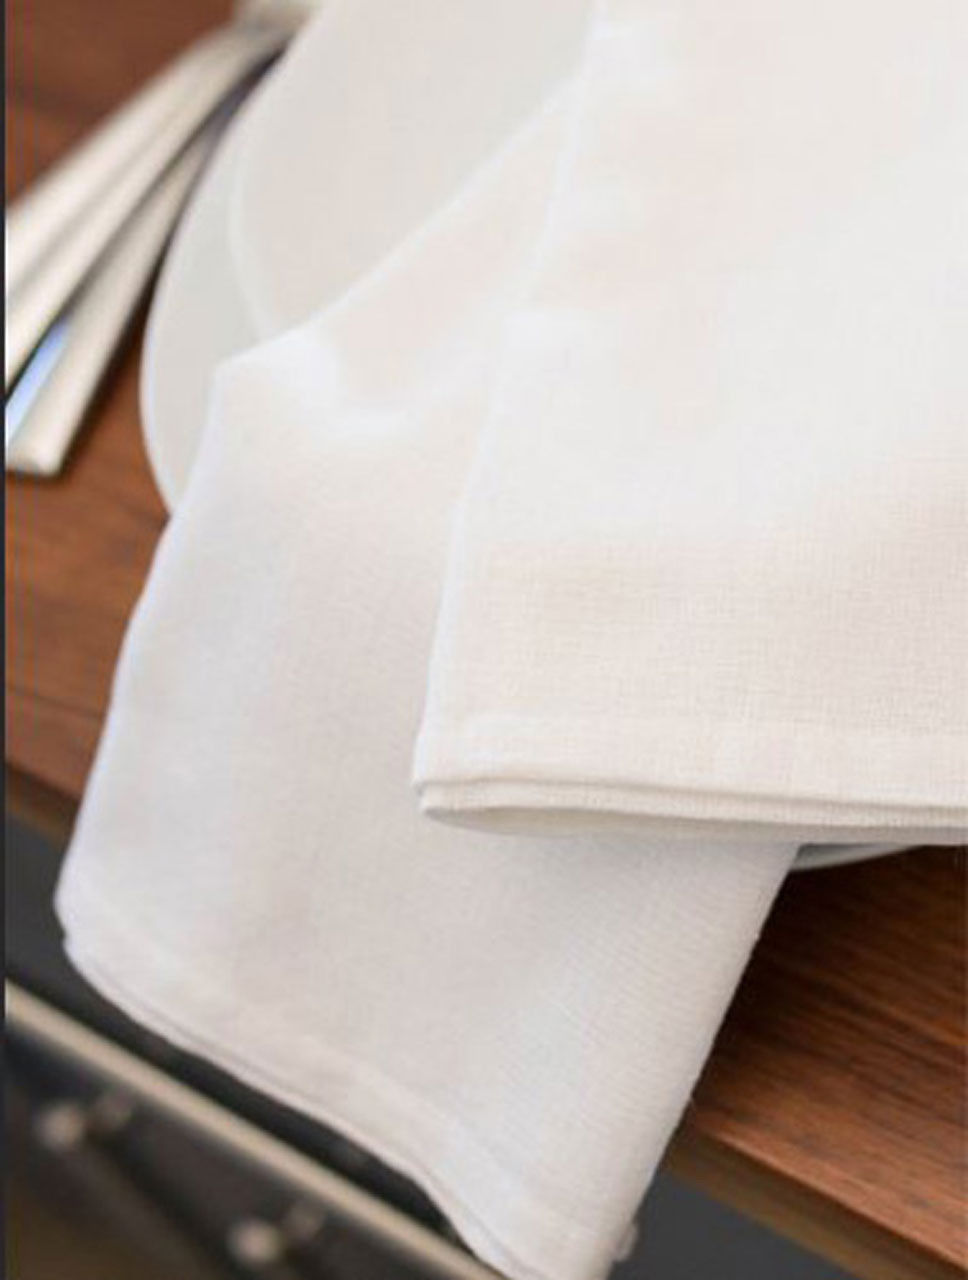 What are the exact specs of the 100% Cotton Huck Towel?